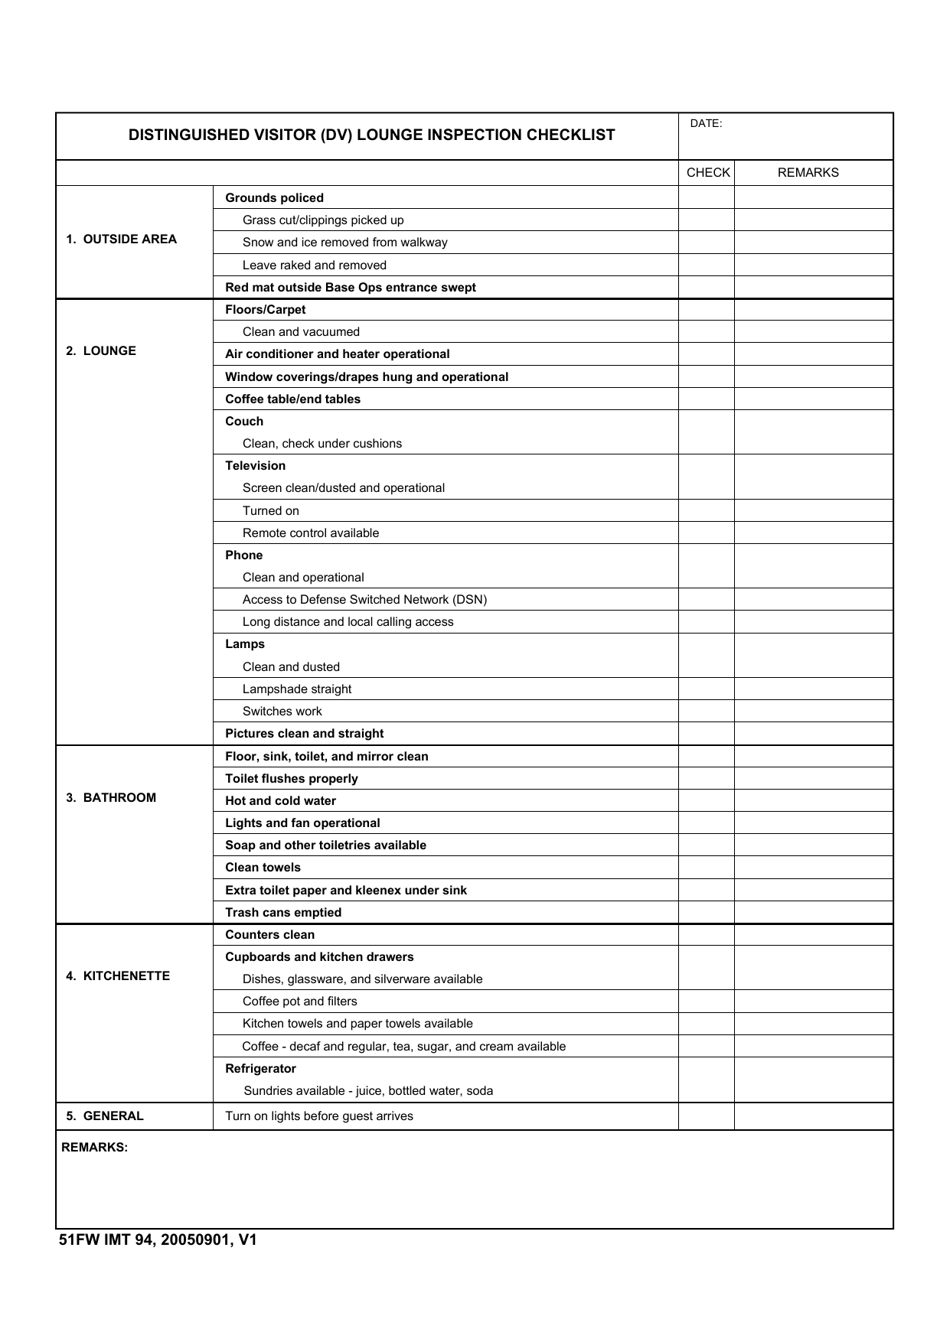 51 FW IMT Form 94 Distinguished Visitor (Dv) Lounge Inspection Checklist, Page 1